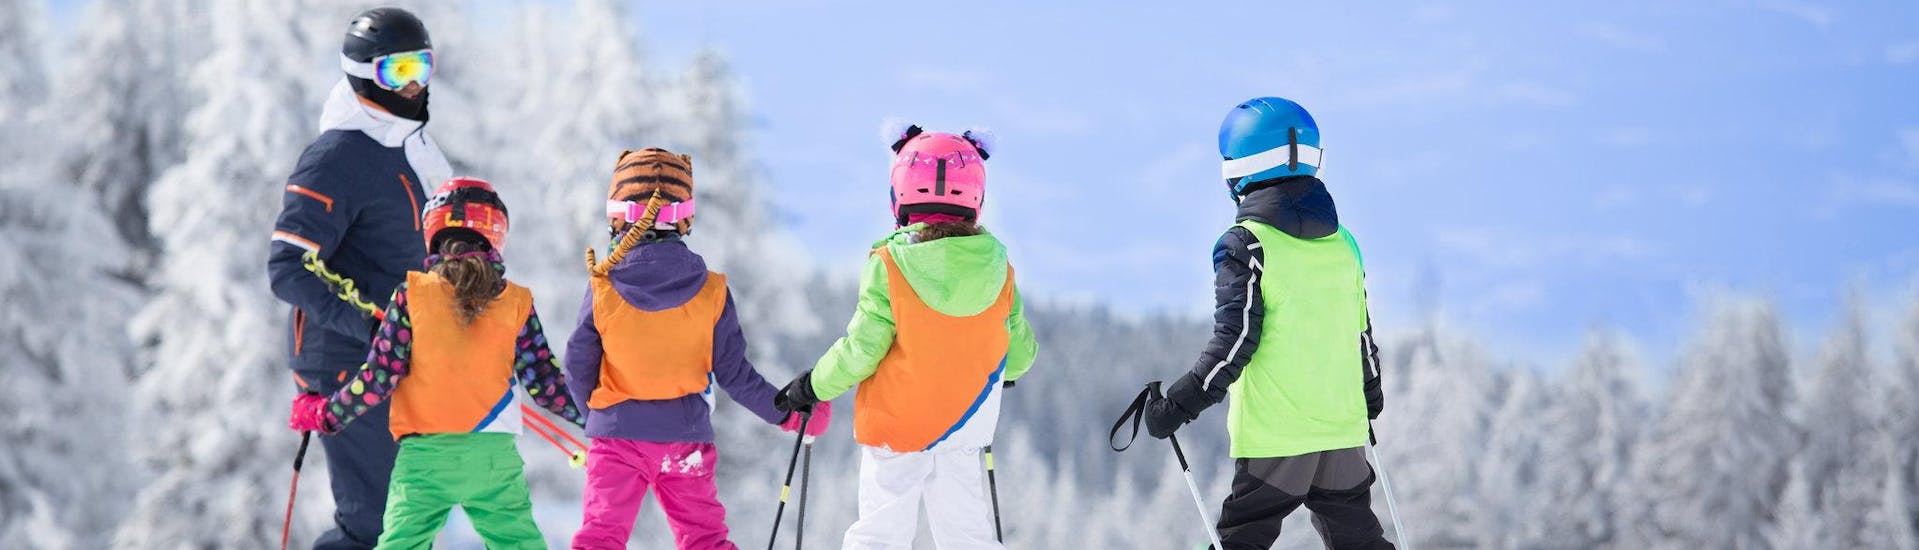 3 skiers prepare for their ski lessons in English in the ski resort of Cortina.